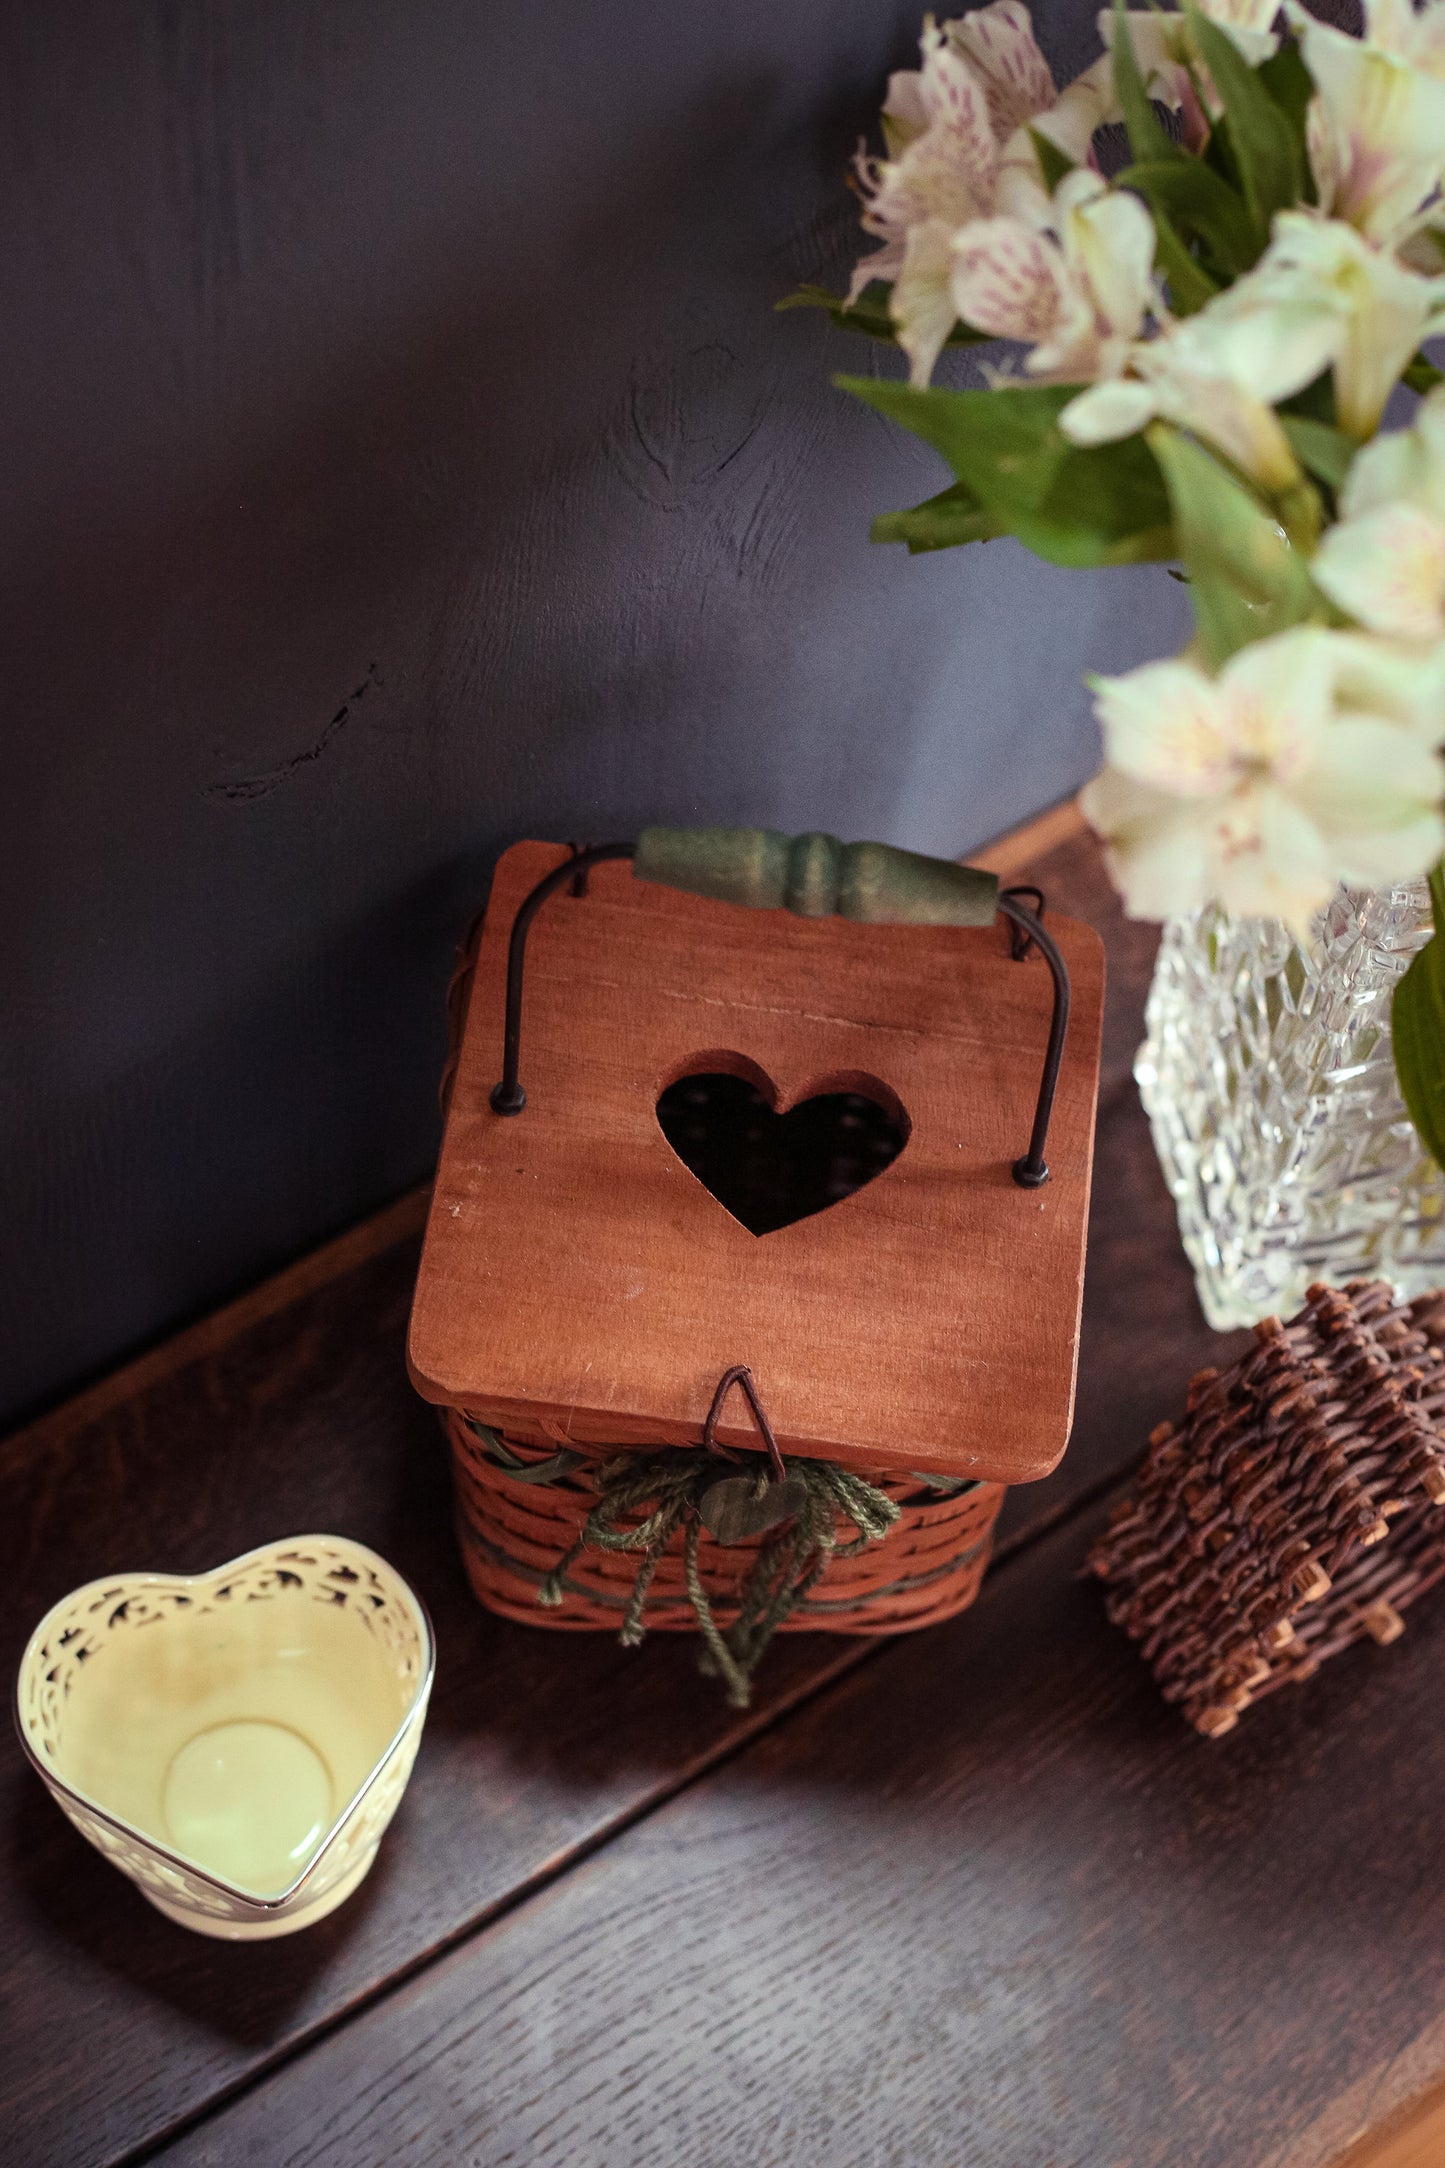 Wicker Rattan Tissue Basket with Heart Details and Handle - Small Lidded Basket with Green Accents & Handle